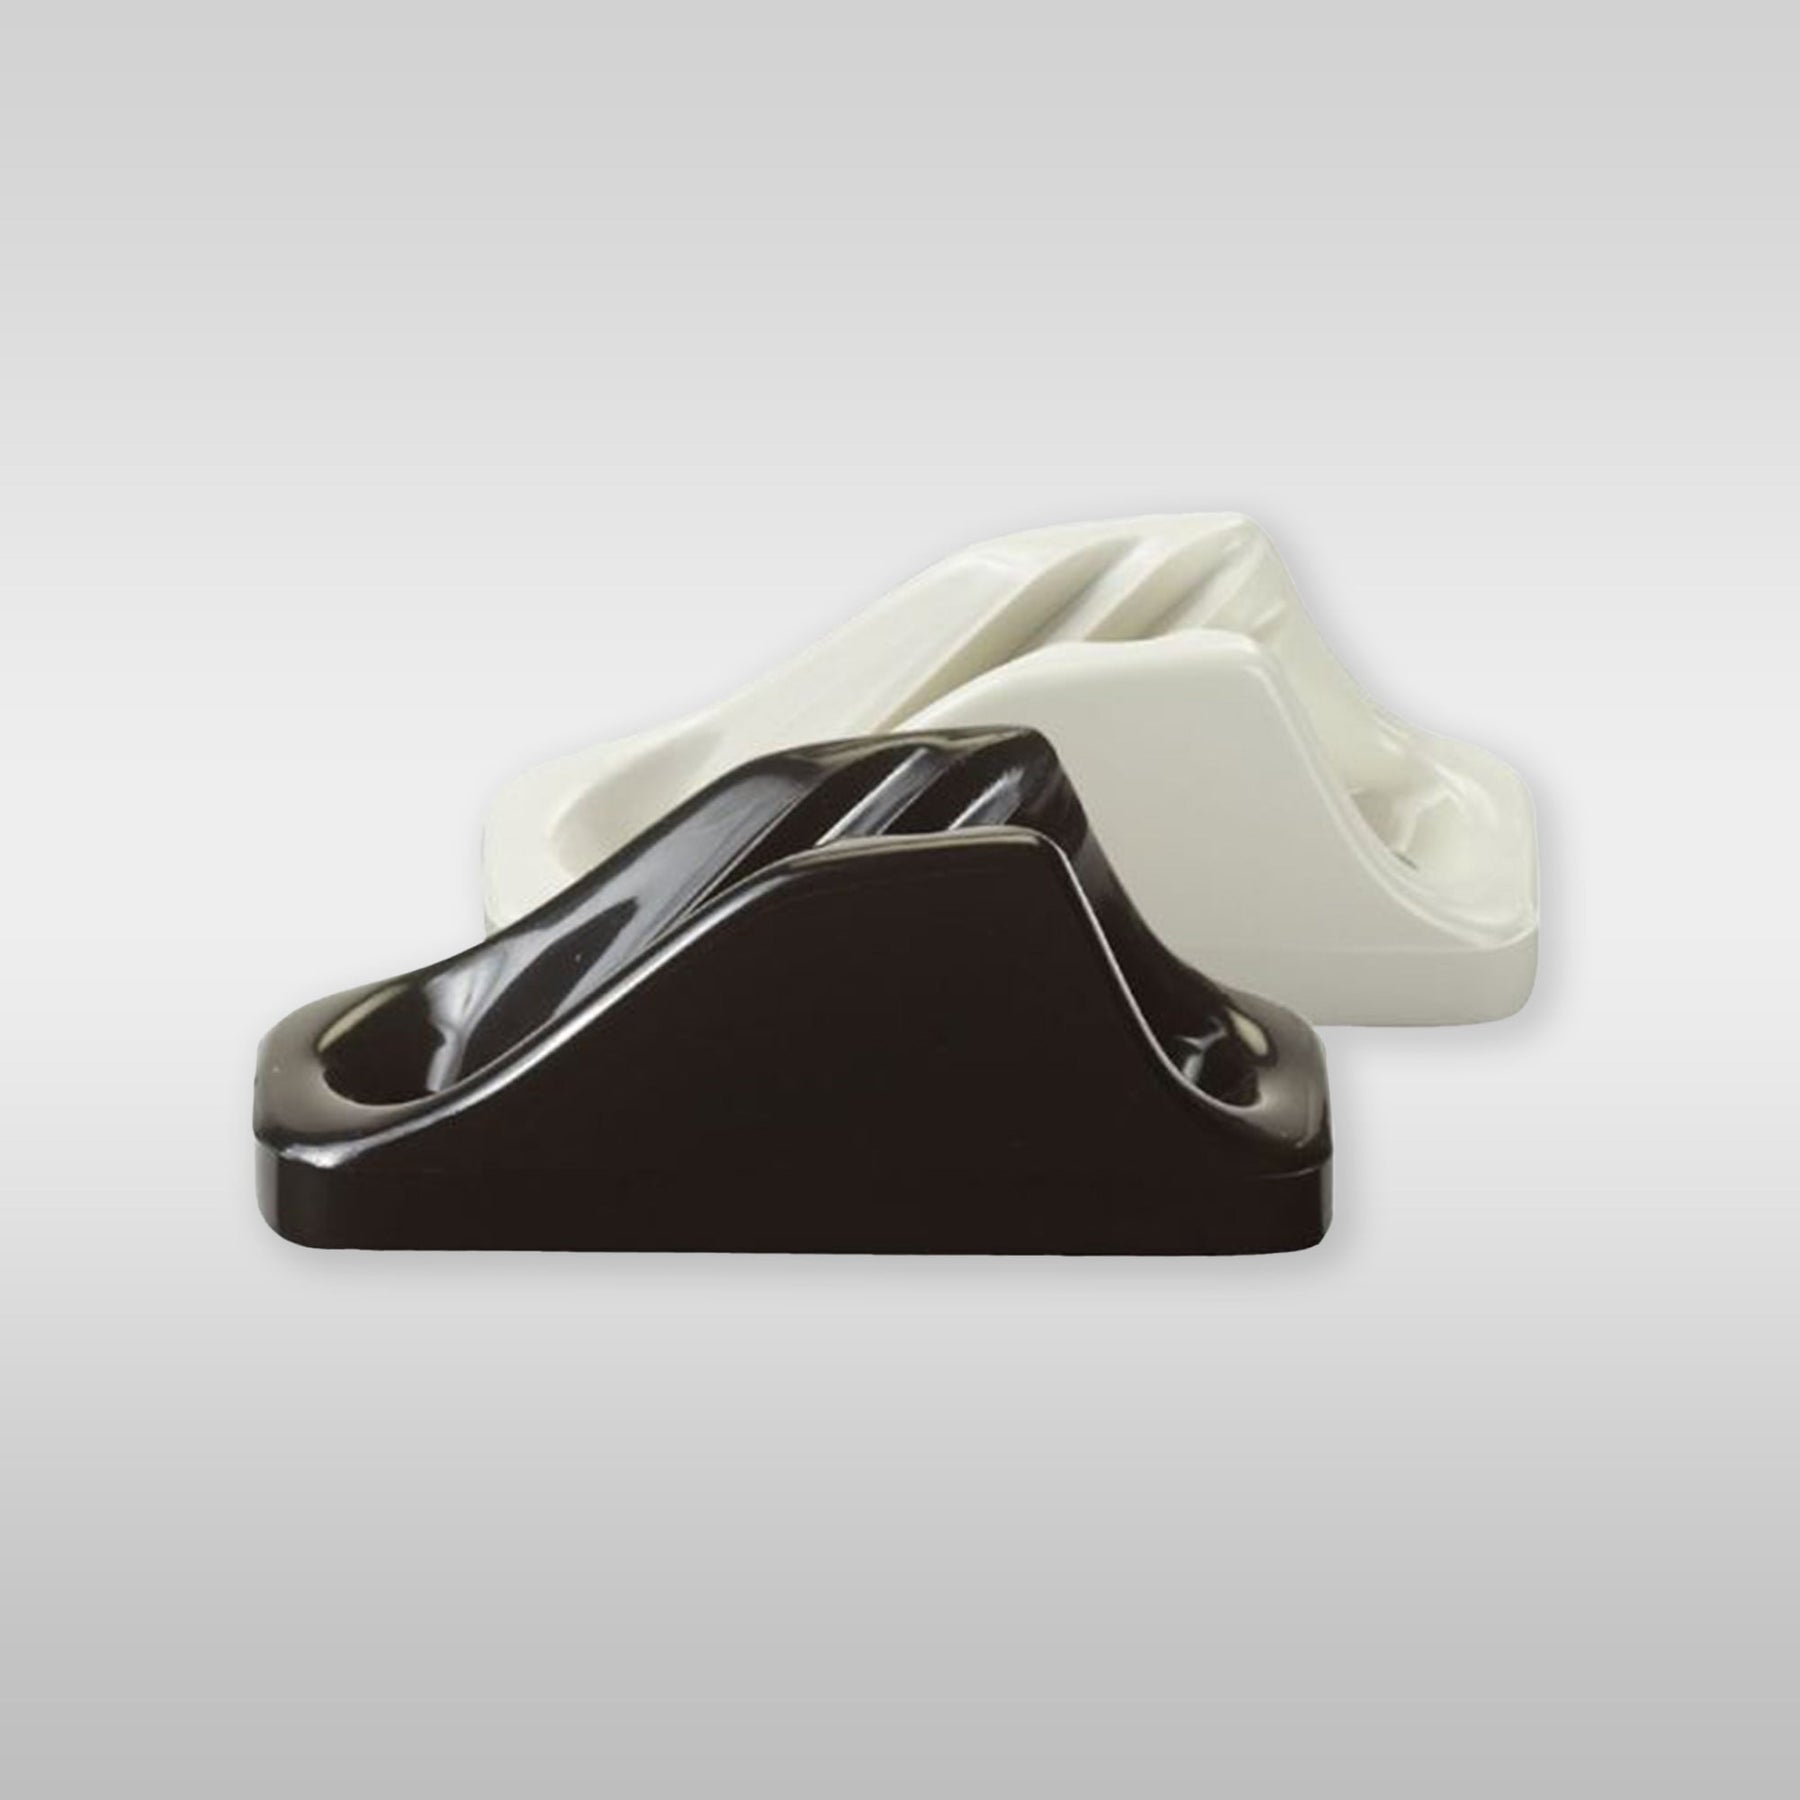 Windsurfshop windsurfwinkel windsurf-shop windsurf shop windsurfing shop windsurfing windsurfsegel Clamcleat Clamp